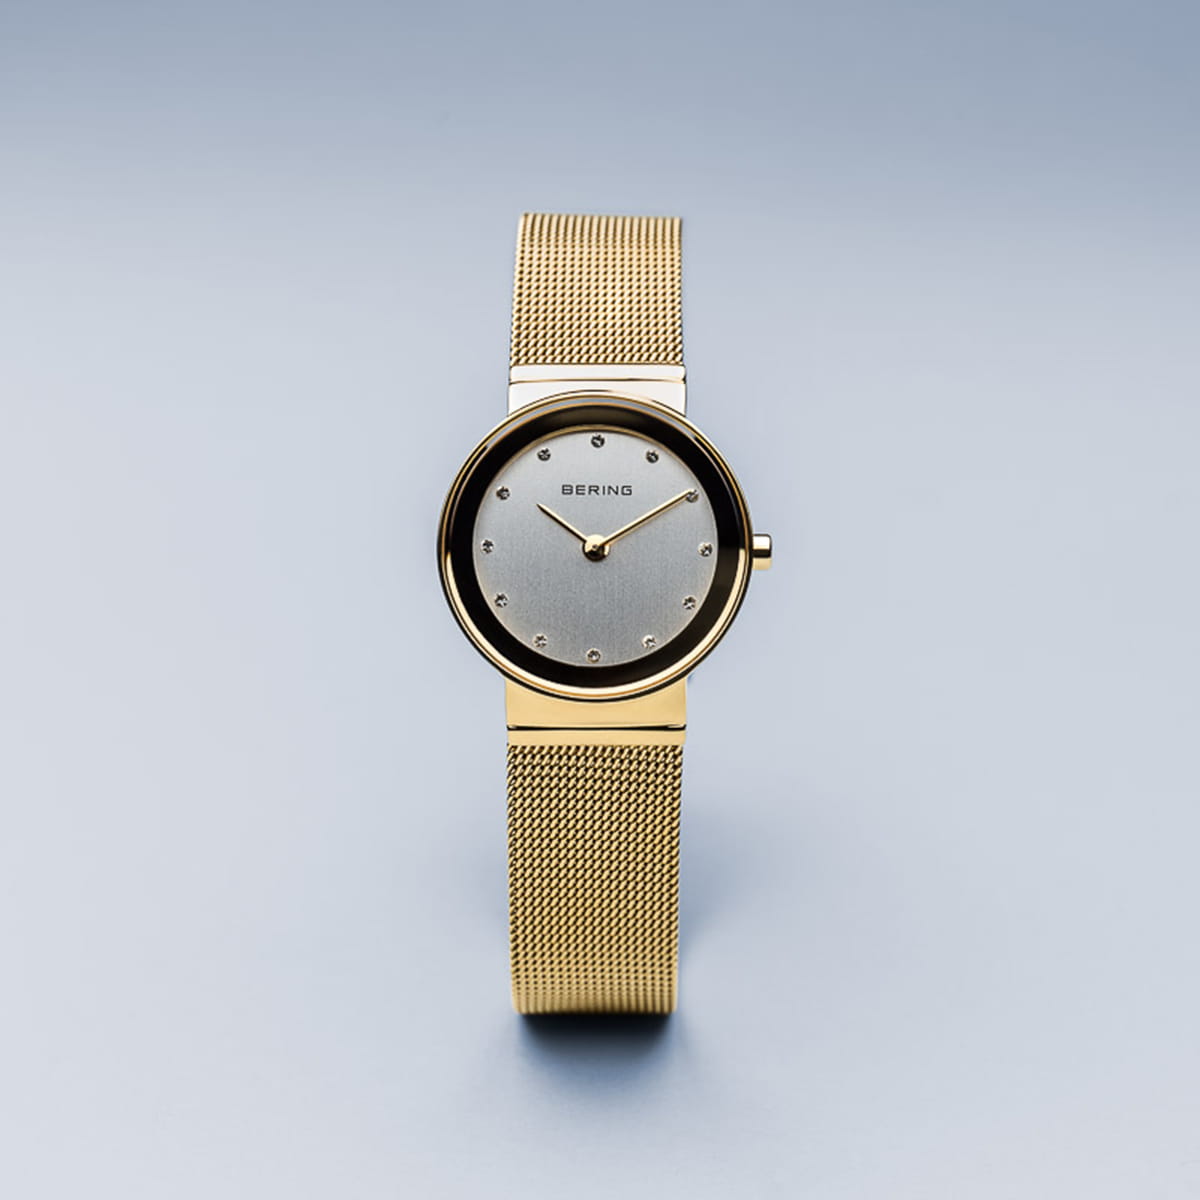 Bering - Classic | polished gold | 10126-334